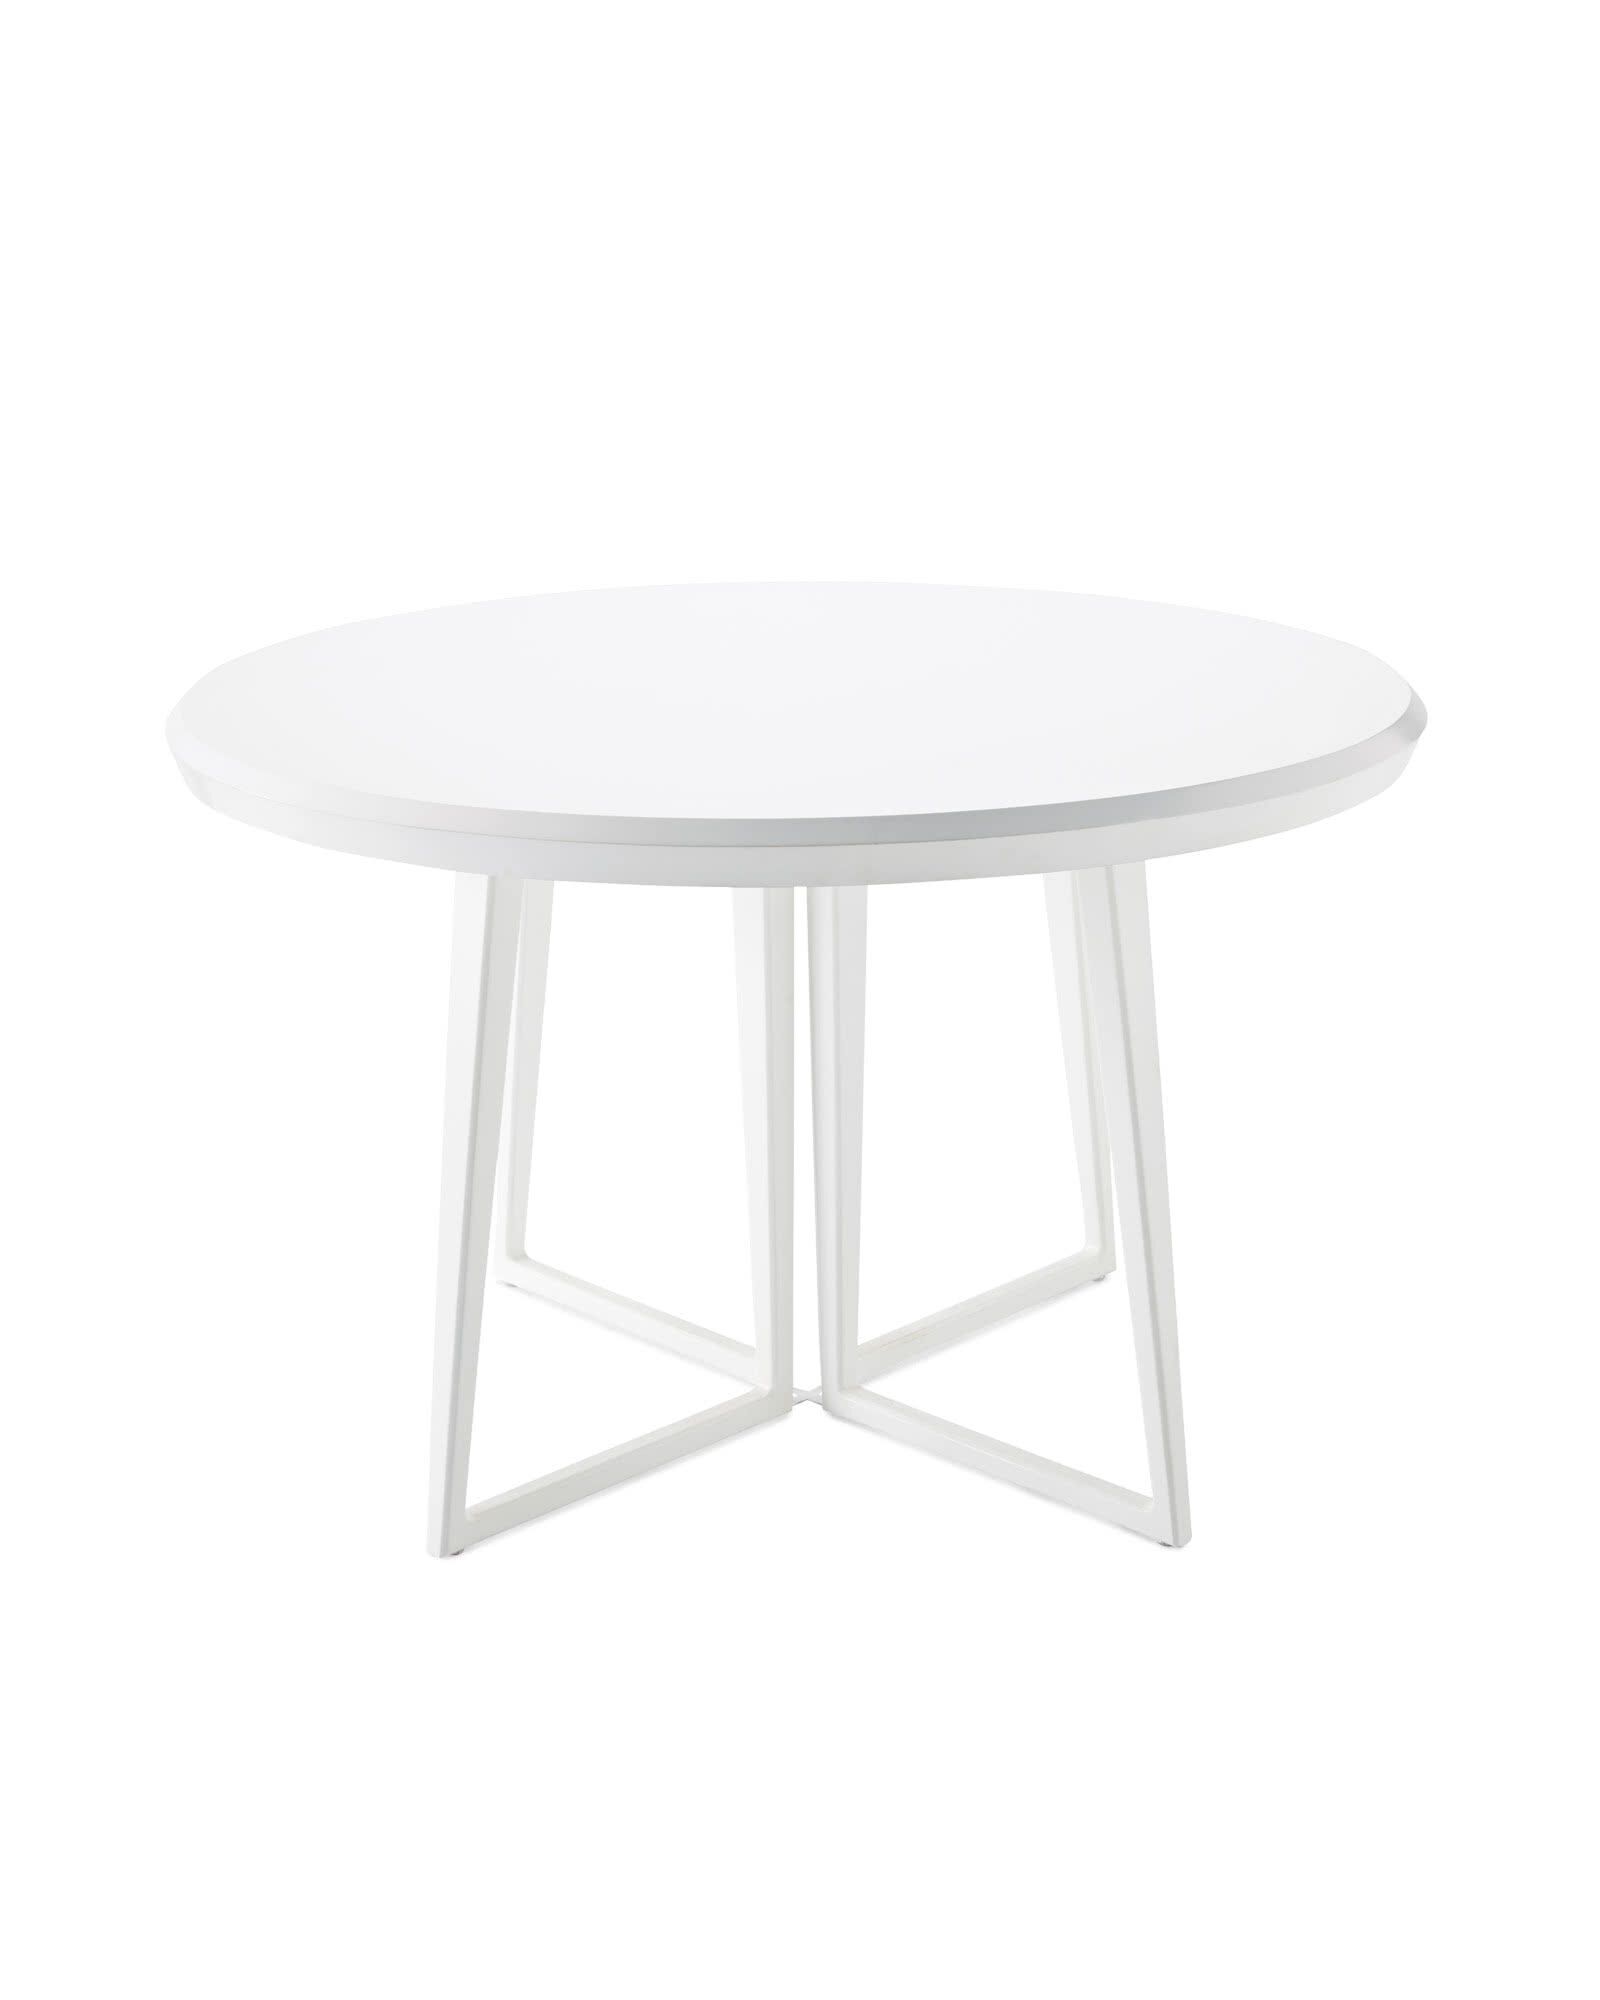 Downing 48" Dining Table | Serena and Lily